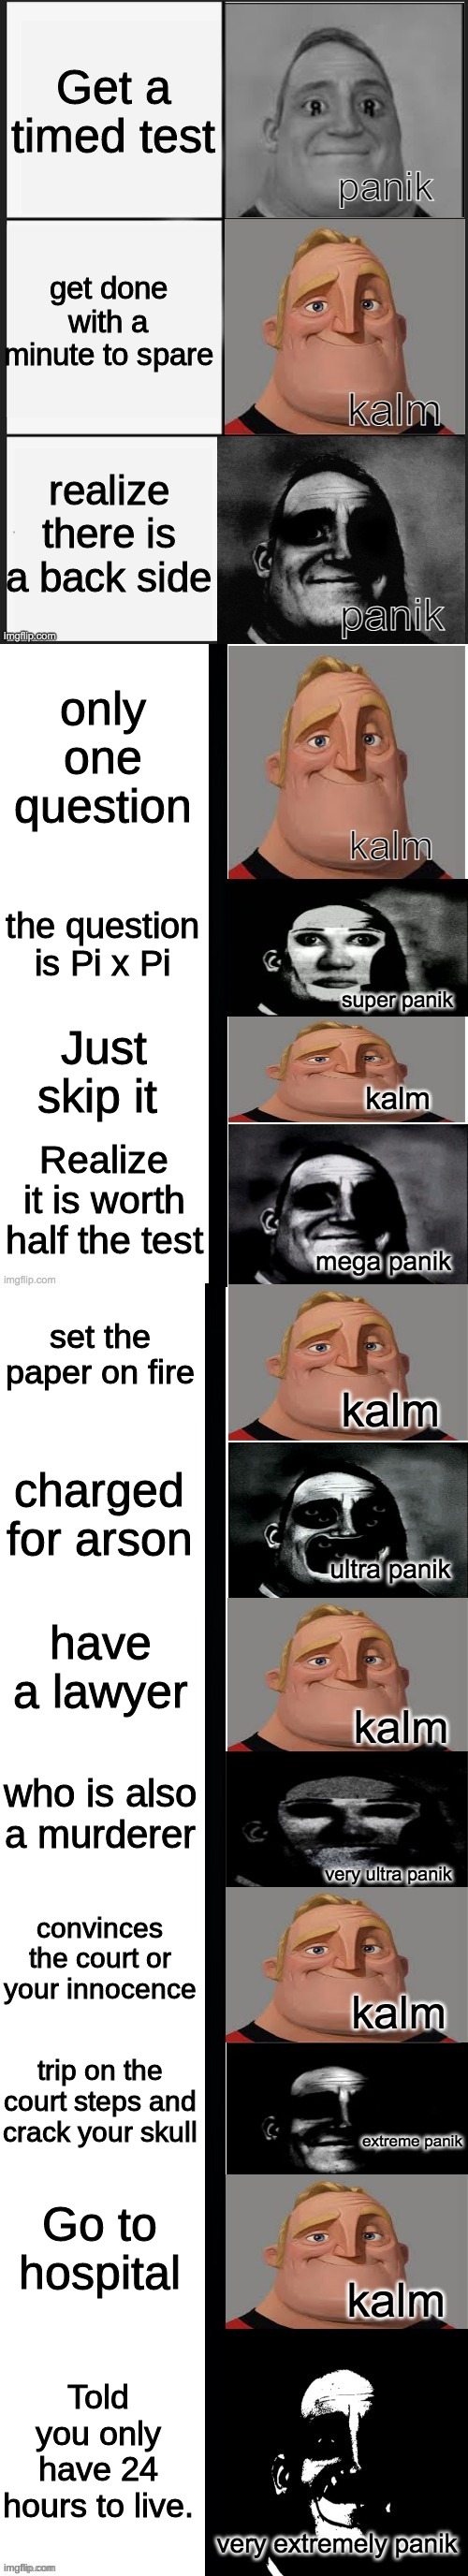 panik kalm panik (mr incredible 2nd extended) |  Get a timed test; get done with a minute to spare; realize there is a back side; only one question; the question is Pi x Pi; Just skip it; Realize it is worth half the test; set the paper on fire; charged for arson; have a lawyer; who is also a murderer; convinces the court or your innocence; trip on the court steps and crack your skull; Go to hospital; Told you only have 24 hours to live. | image tagged in panik kalm panik mr incredible 2nd extended | made w/ Imgflip meme maker